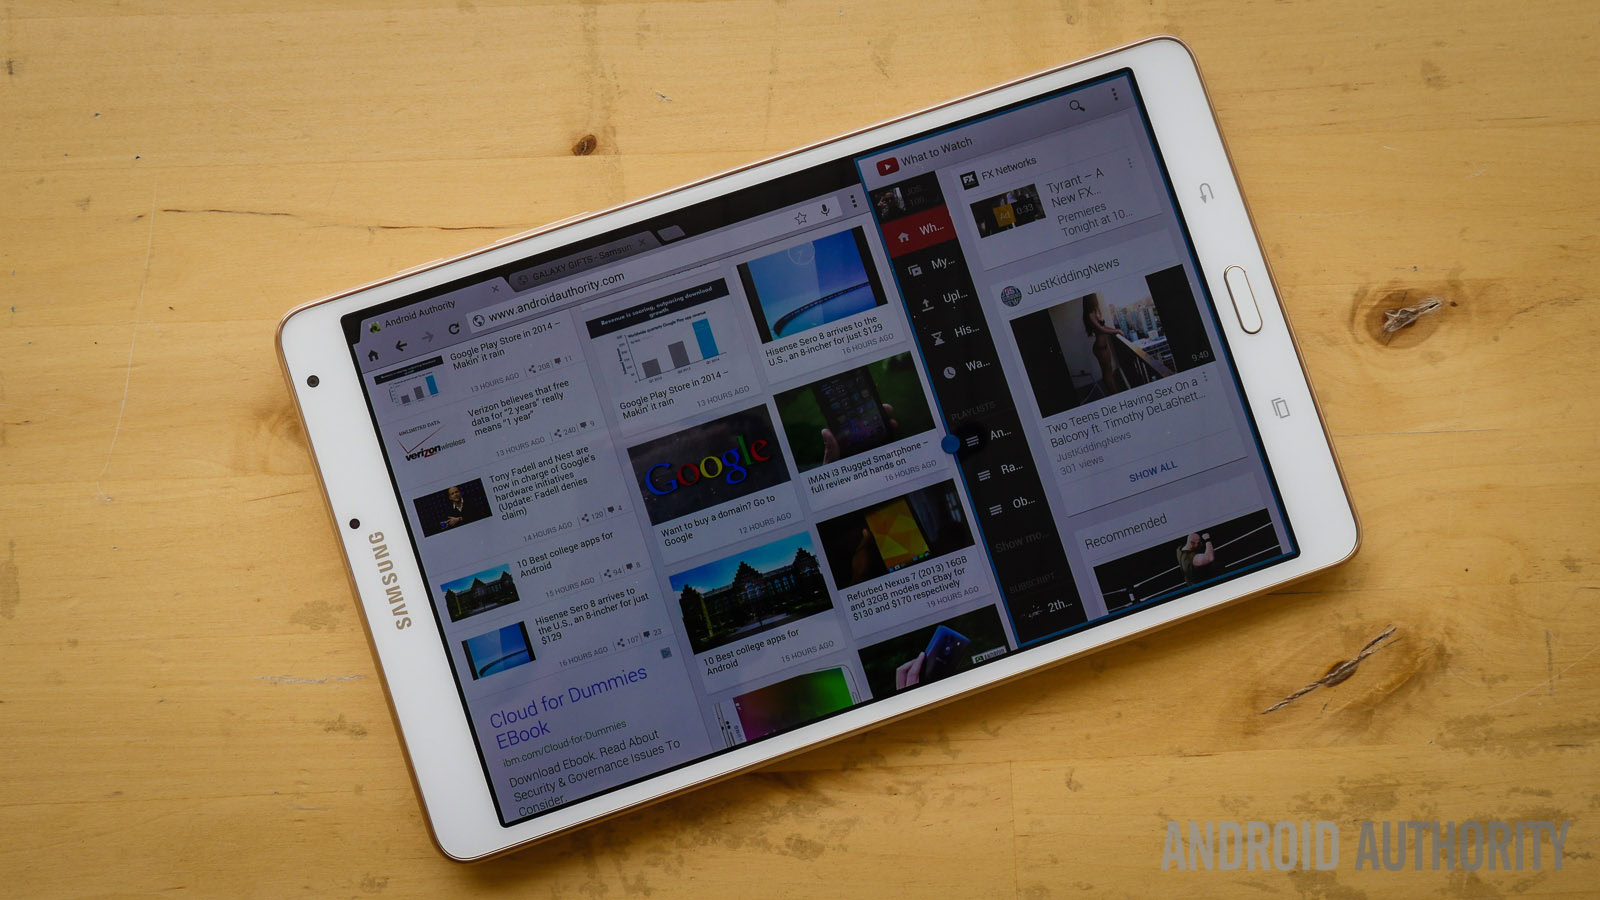 samsung galaxy tab s 8.4 review (26 of 27)